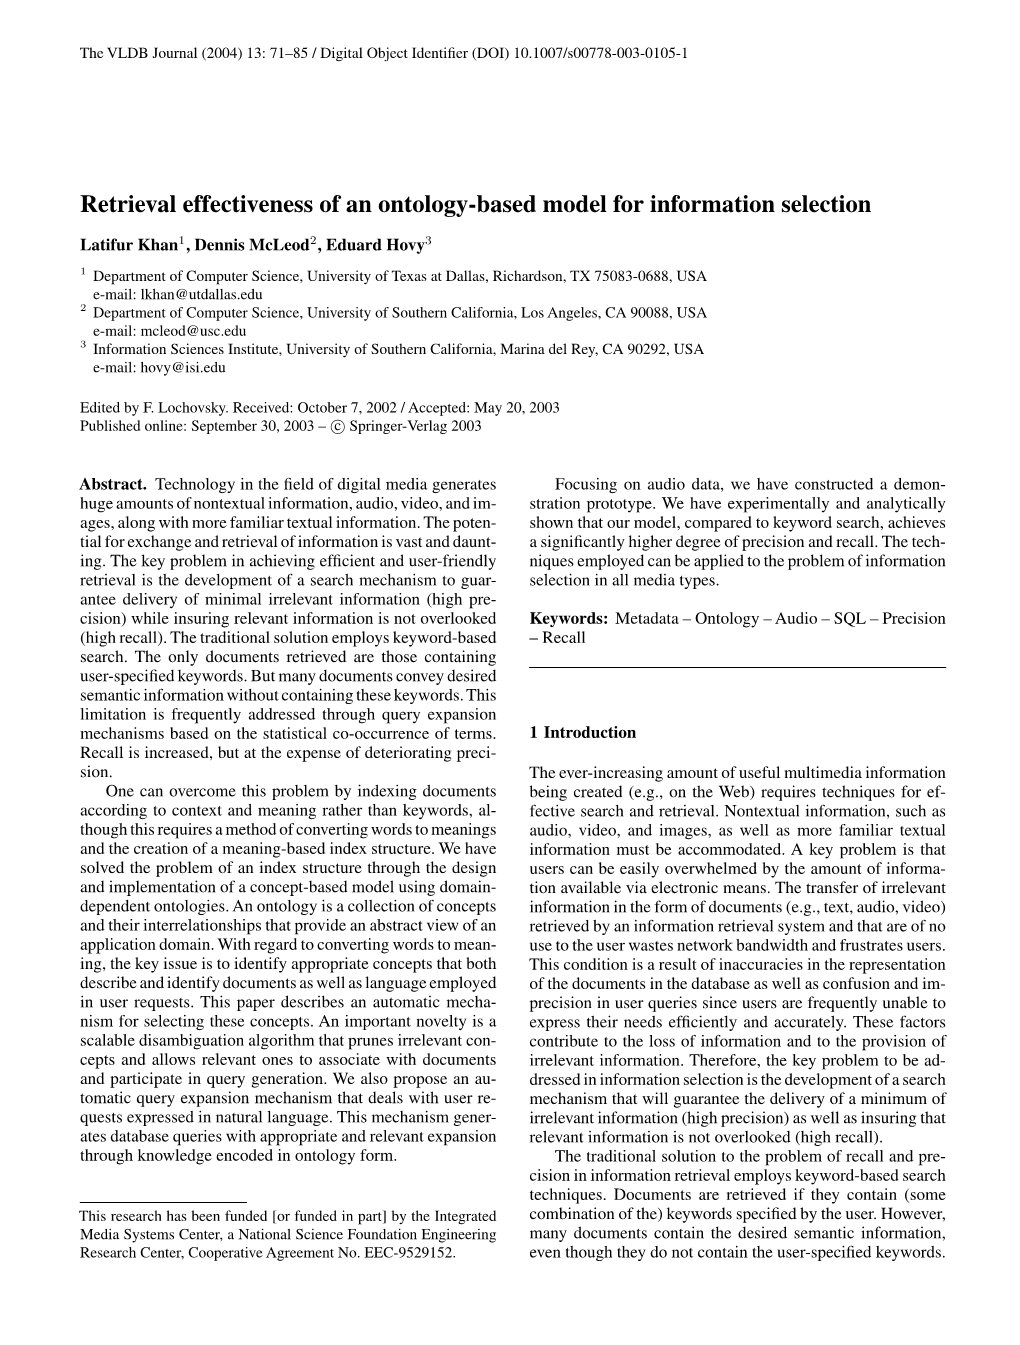 Retrieval Effectiveness of an Ontology-Based Model for Information Selection